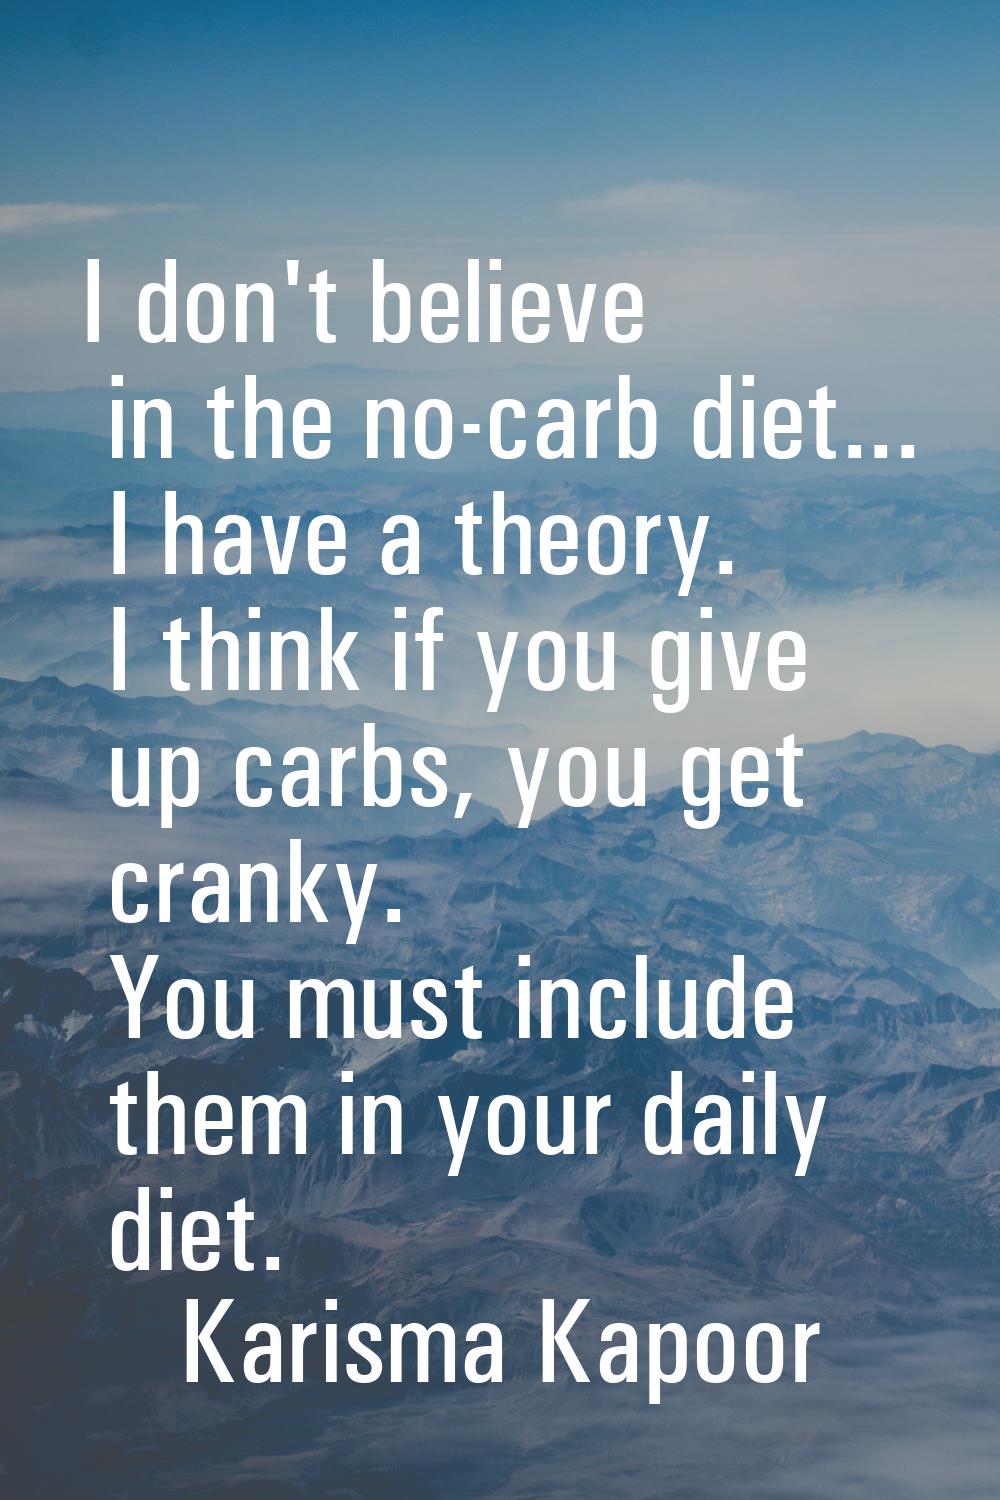 I don't believe in the no-carb diet... I have a theory. I think if you give up carbs, you get crank